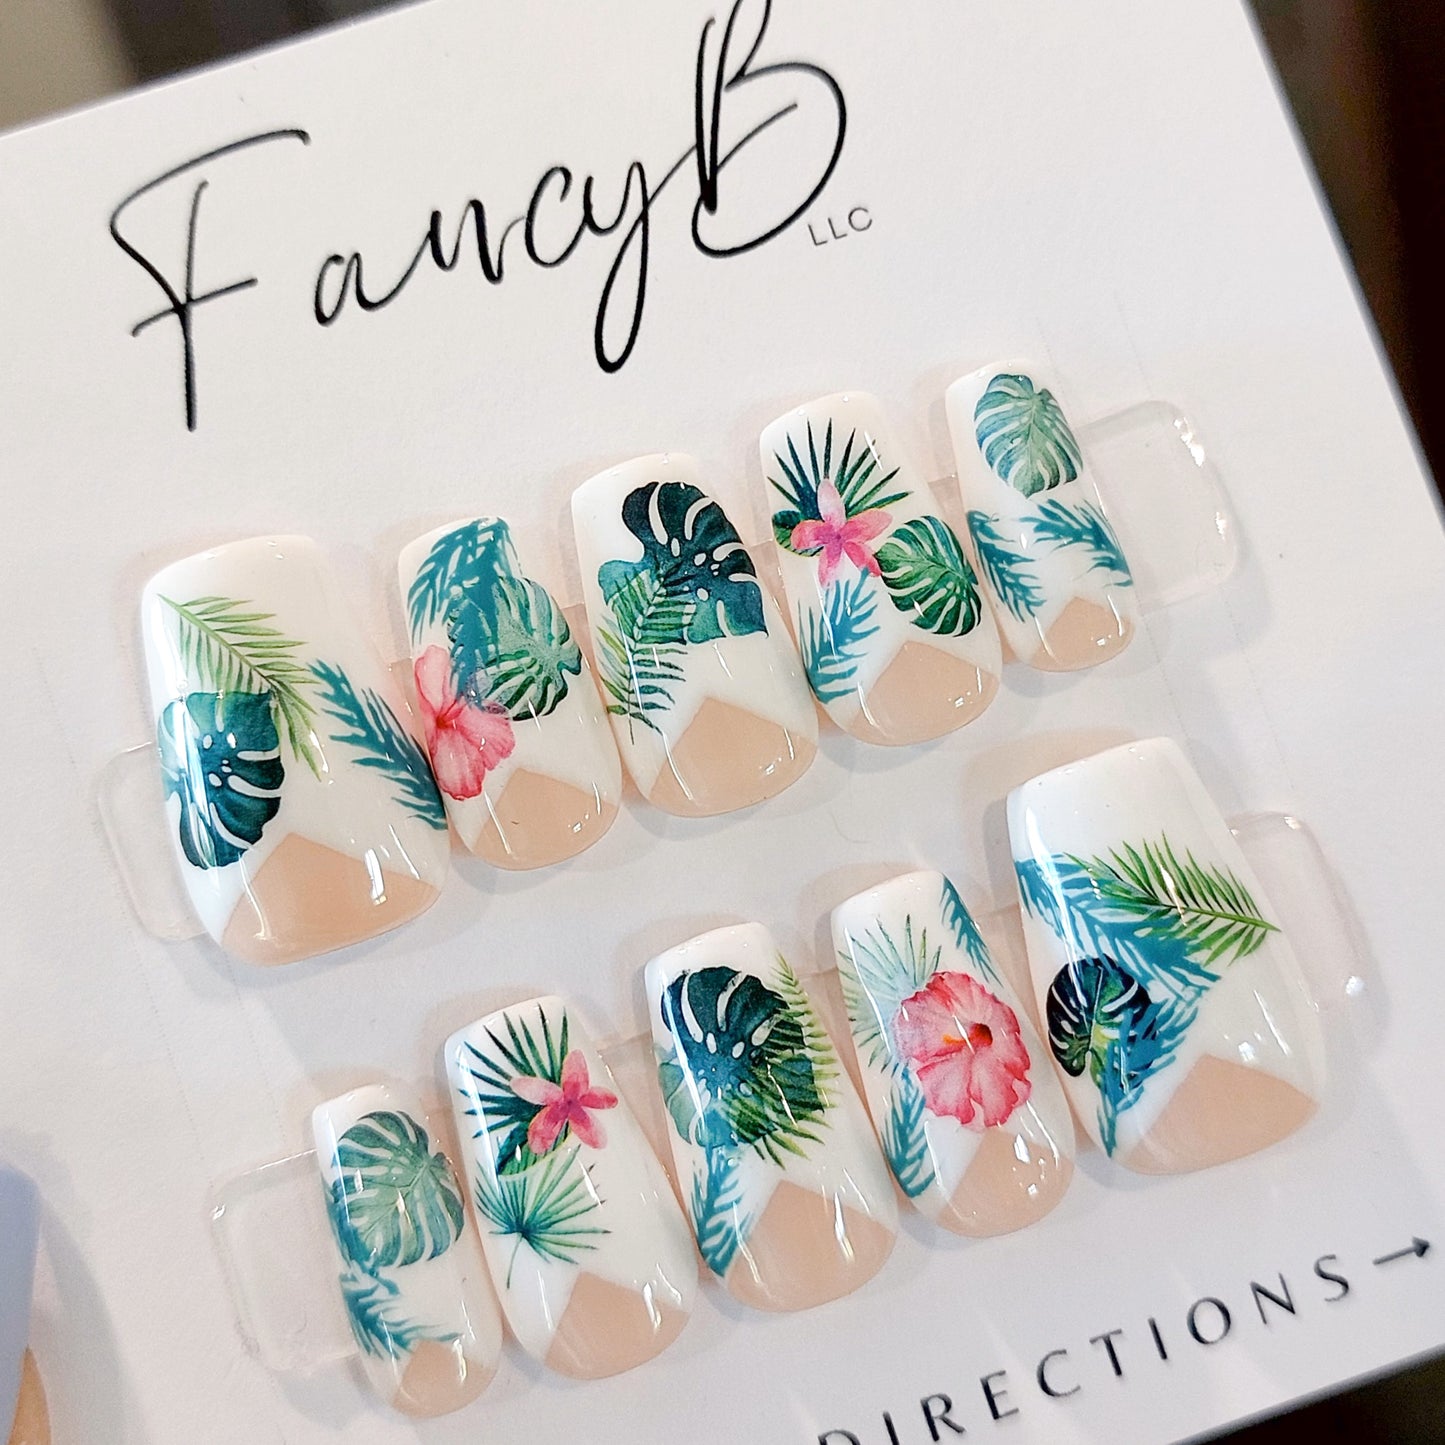 Tropical press on nails with monstera leaves and palm leaves in fuscia and teal colors, a low french v-cut and short coffin nail shape.